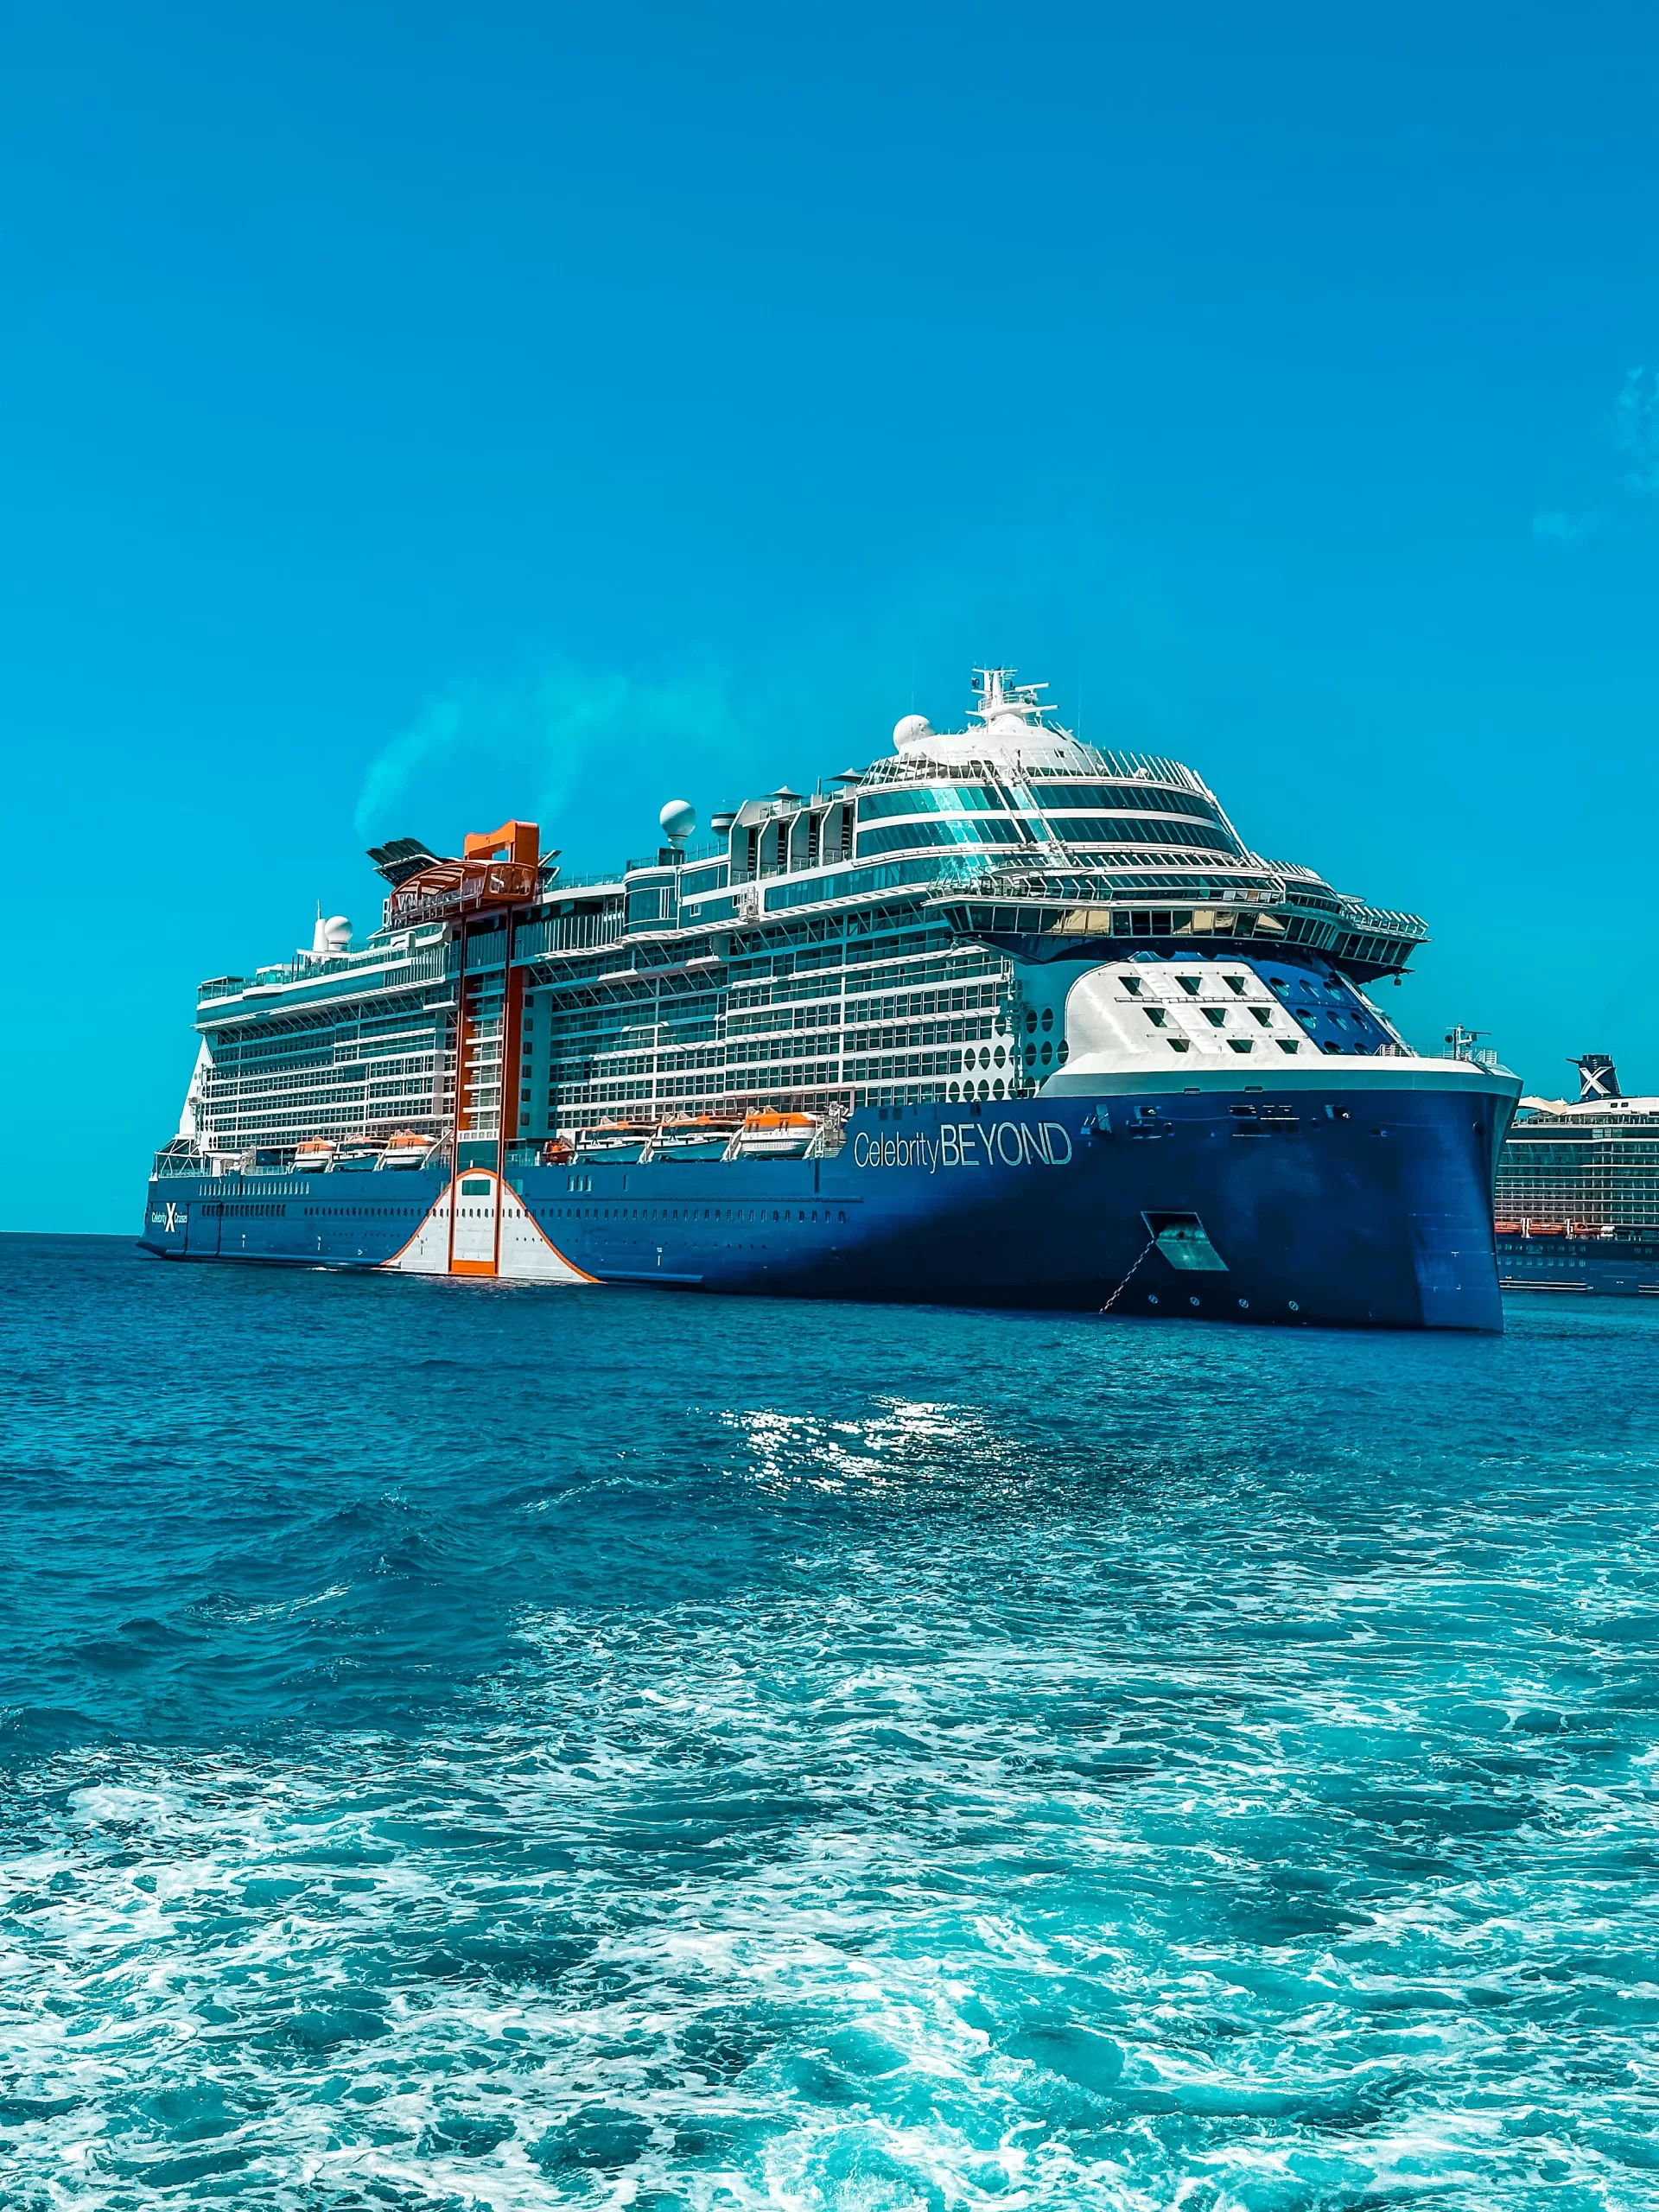 10 Things That Made My Cruise On Celebrity Beyond Epic!